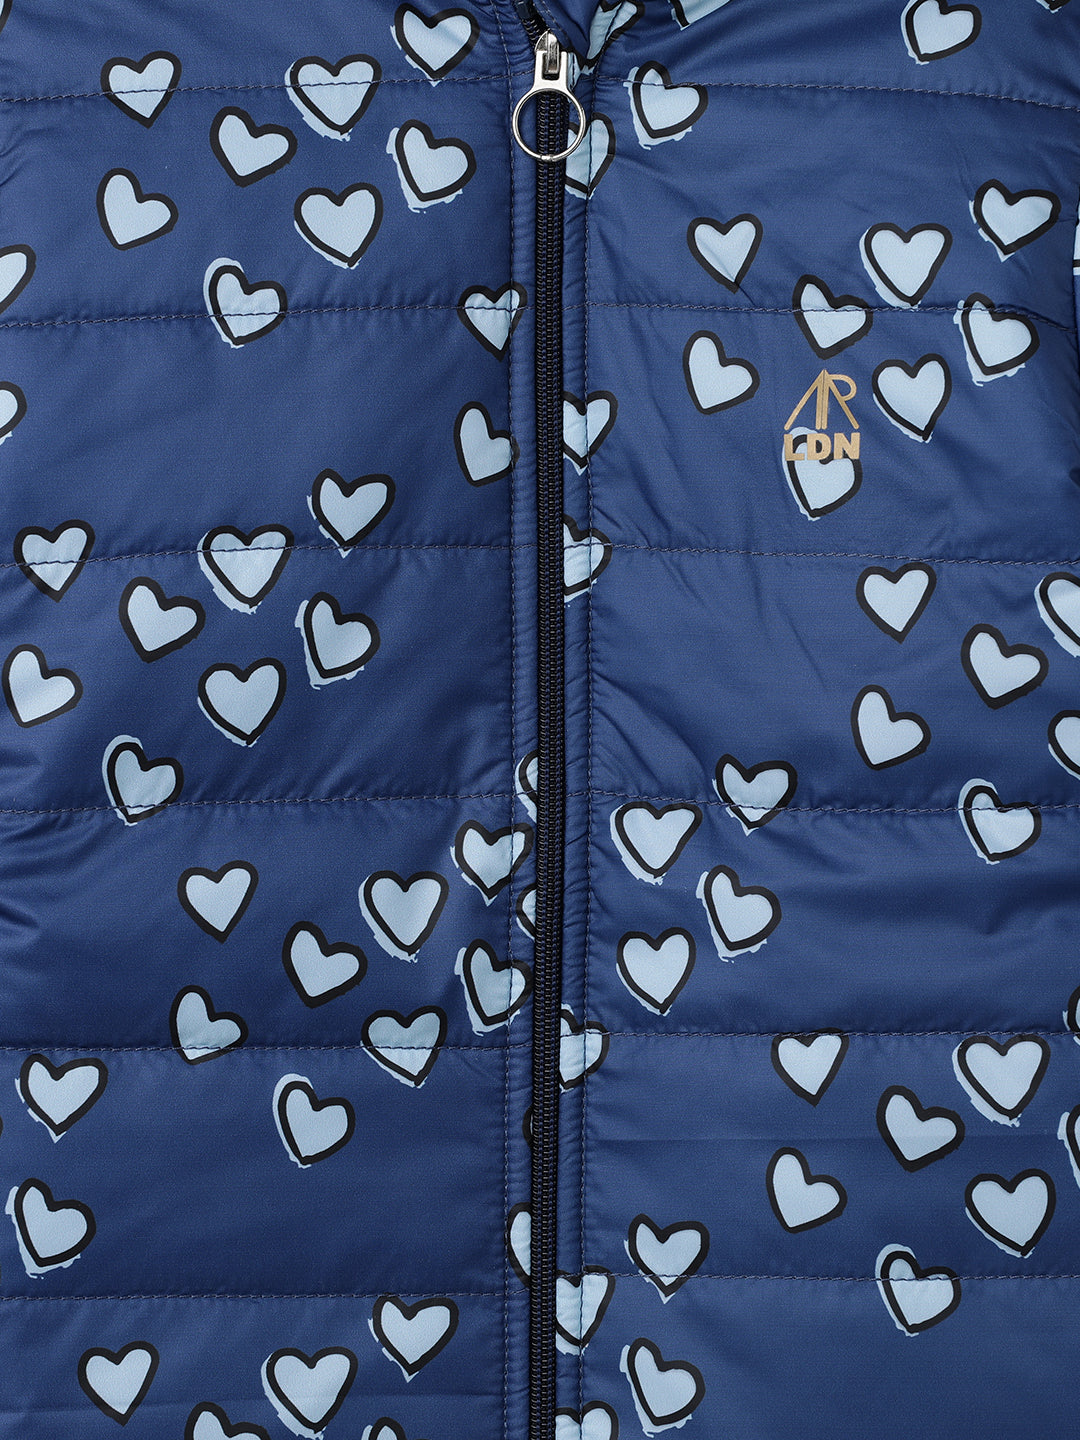 Girls Heart Printed Blue Jacket with Hood